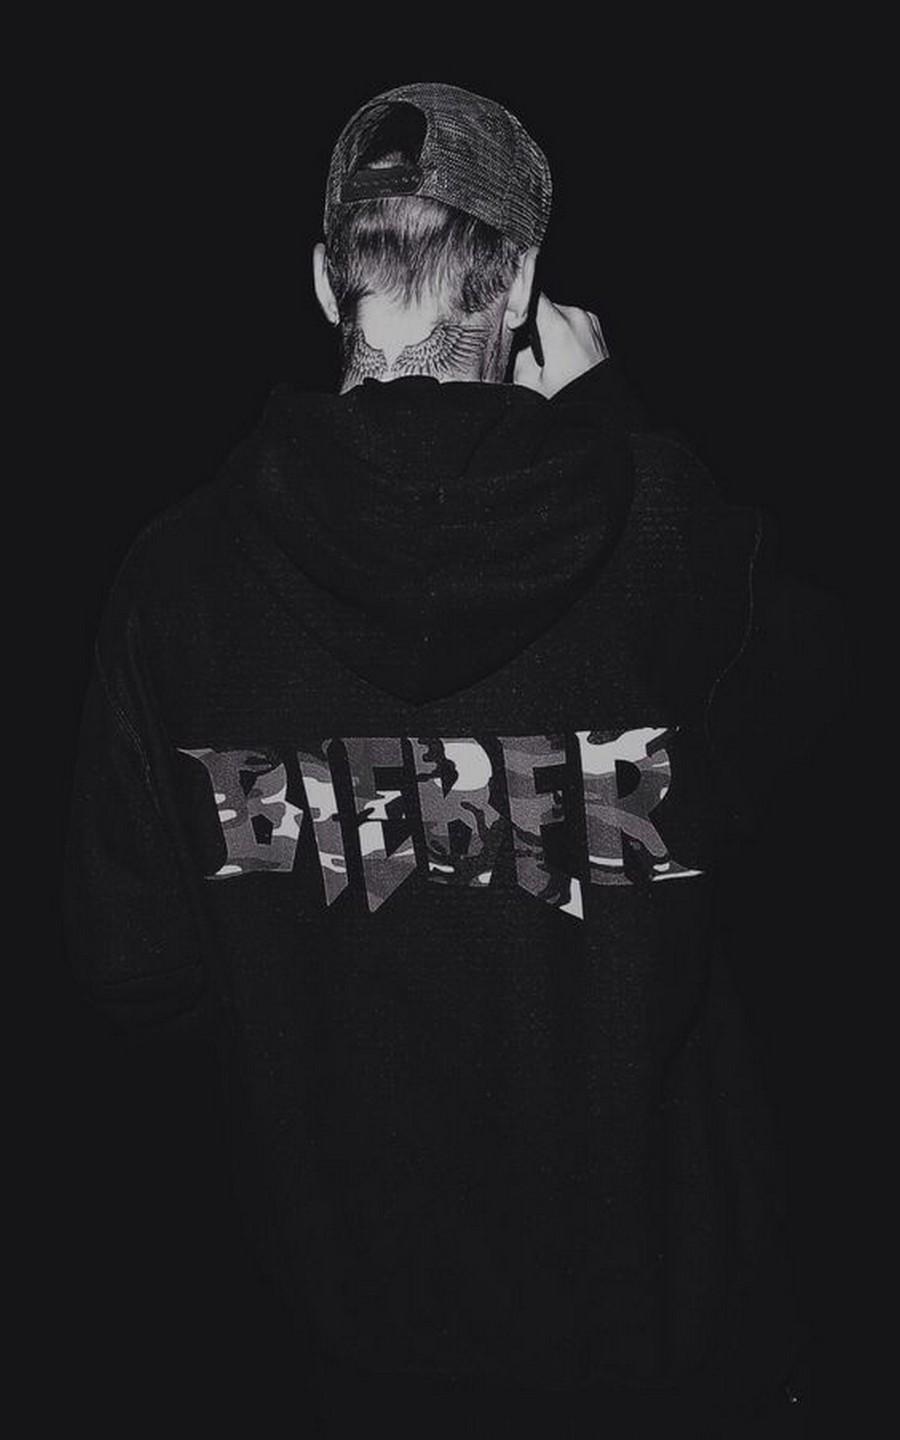 Justin Bieber Wallpaper 4k for Android